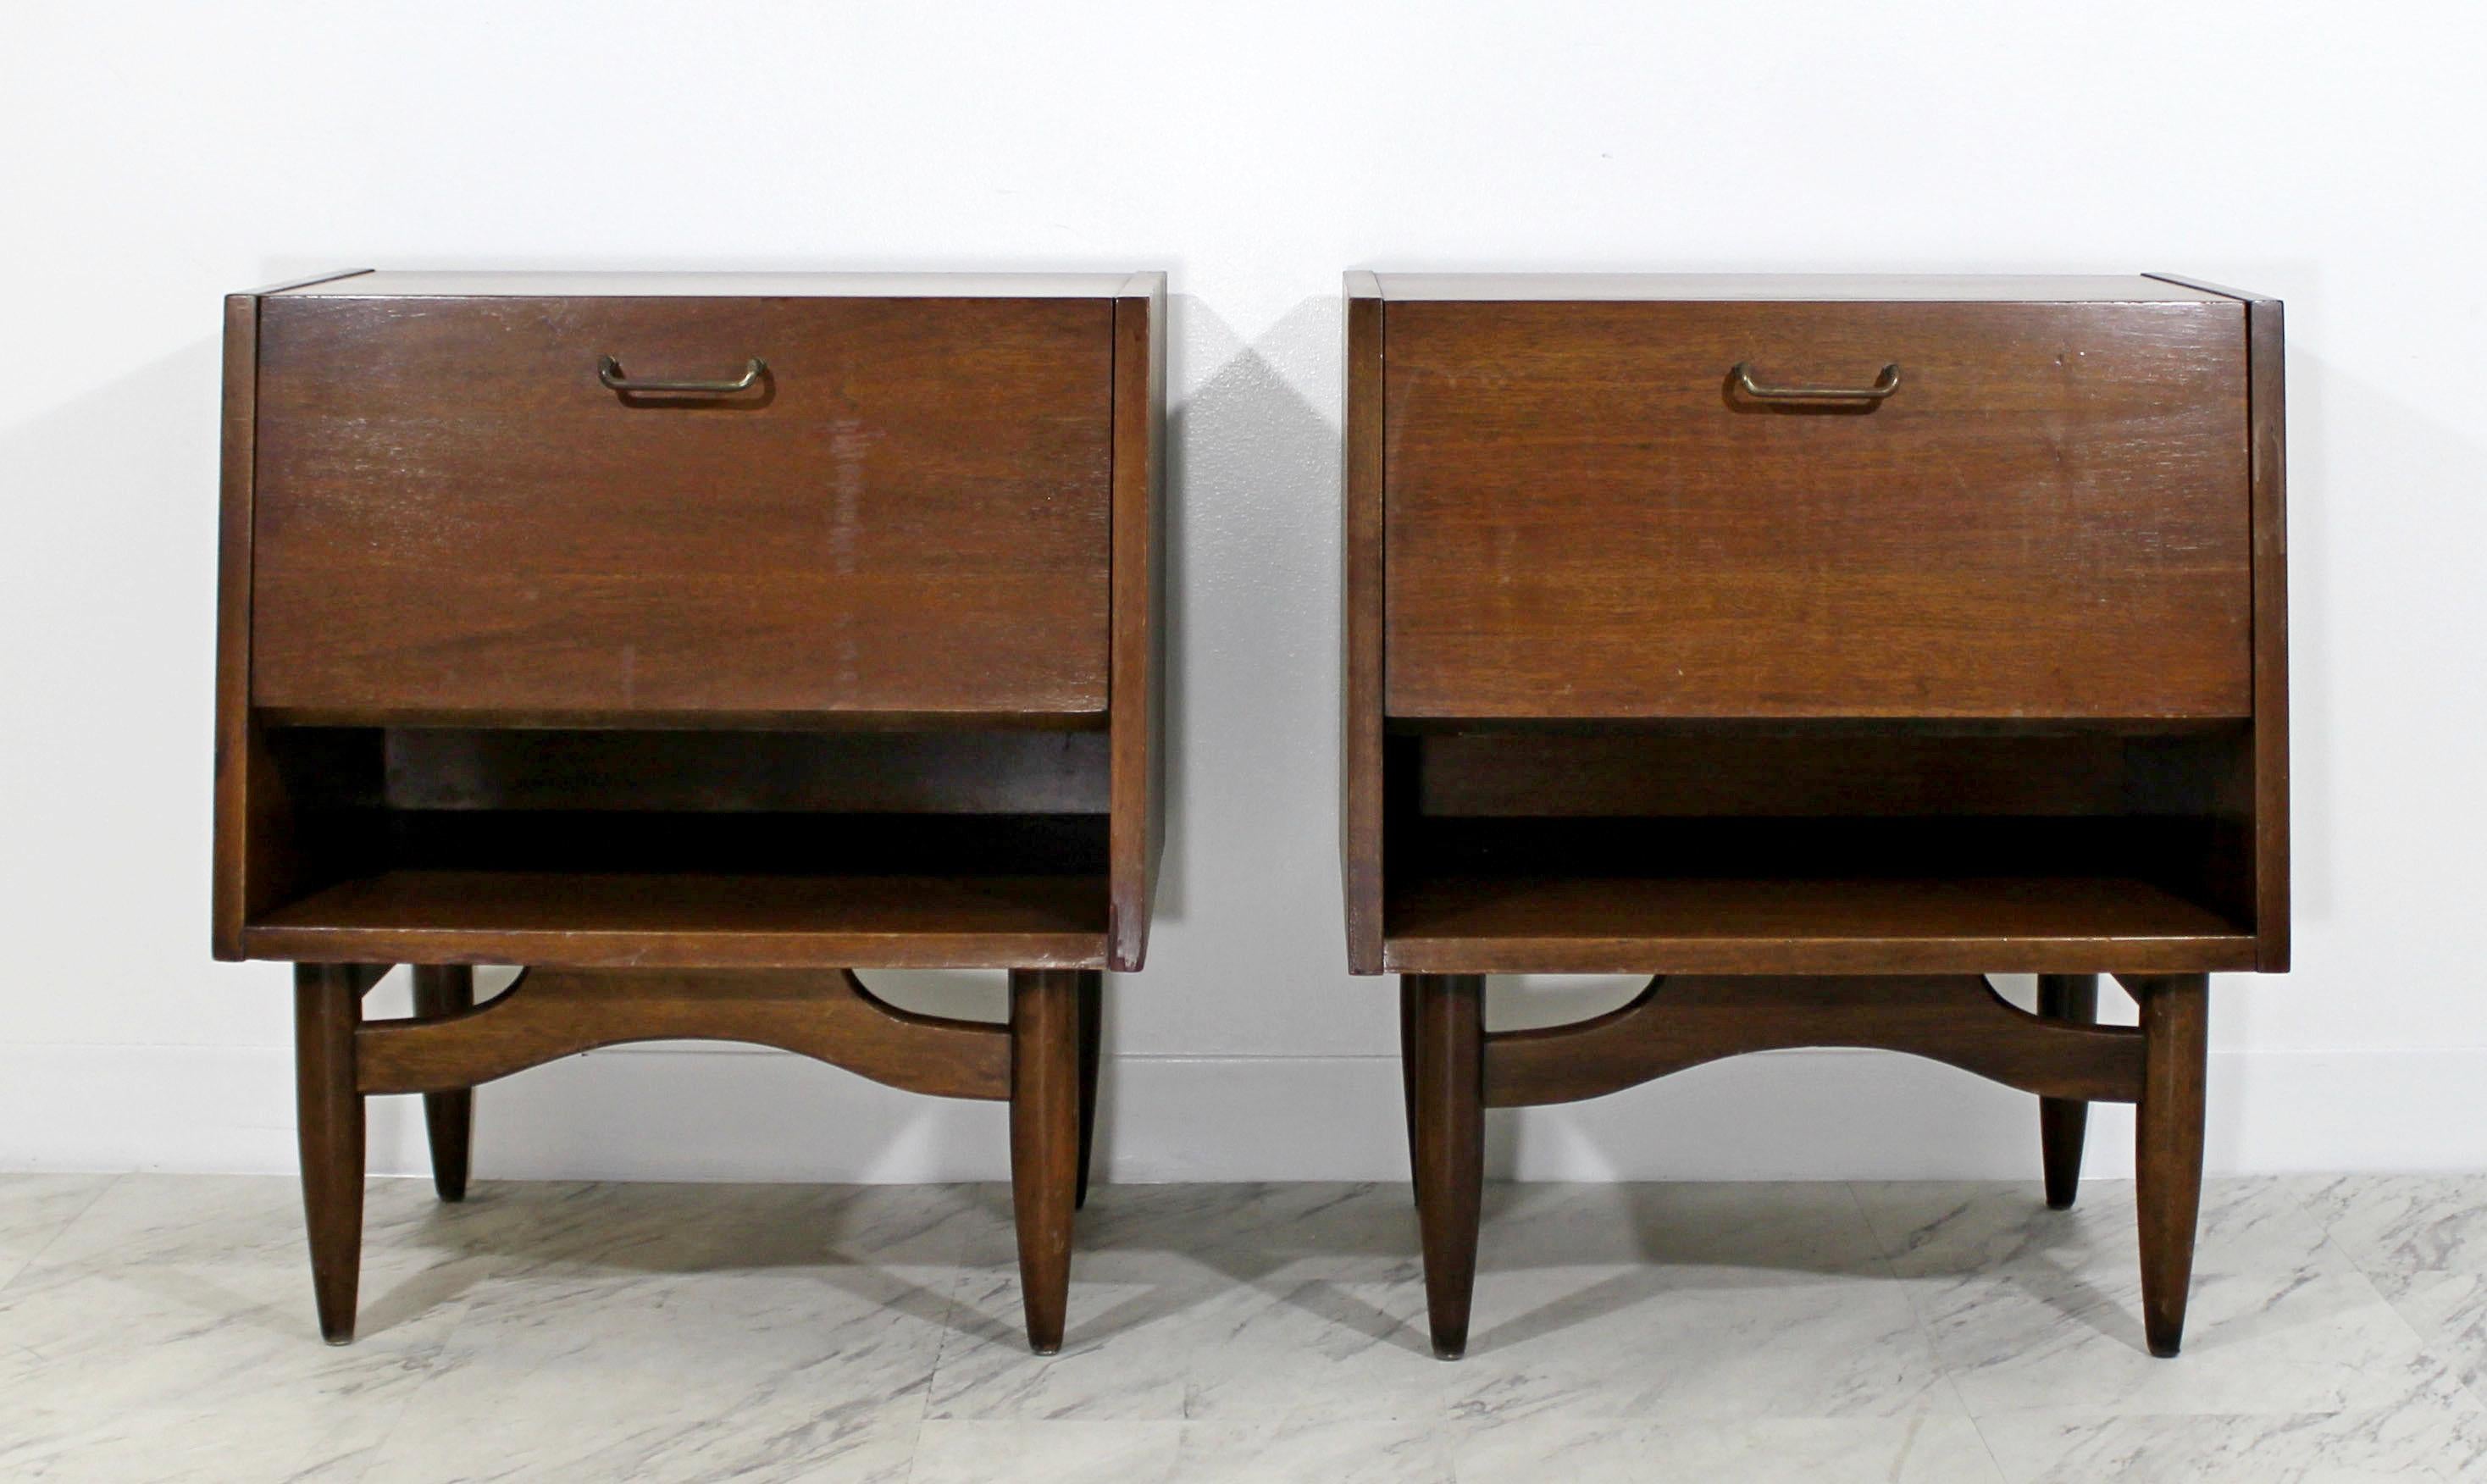 For your consideration is a marvellous pair of walnut nightstands, with one drawer each and a drop down front, by Merton Gershun for American of Martinsville, circa 1950s. In very good condition. The dimensions of each are 22